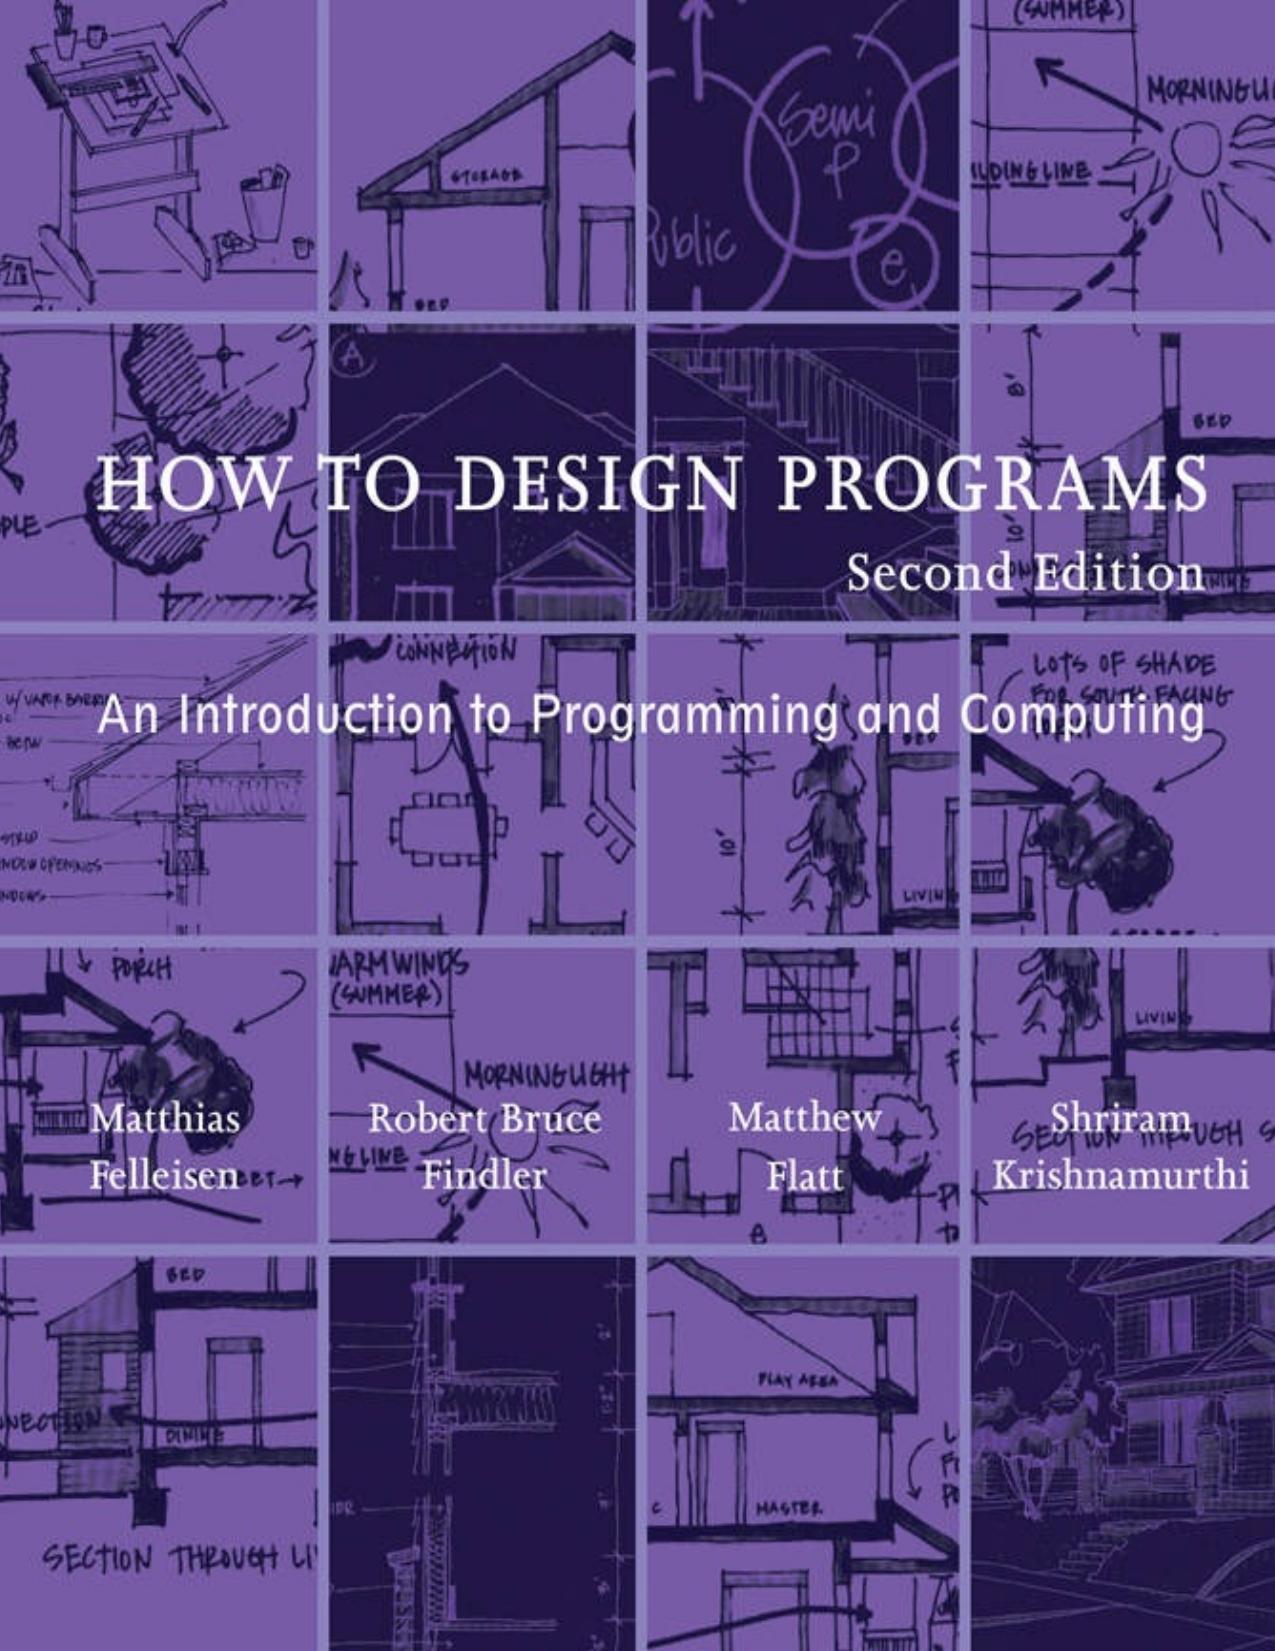 How to Design Programs: An Introduction to Programming and Computing, 2nd Edition - PDFDrive.com